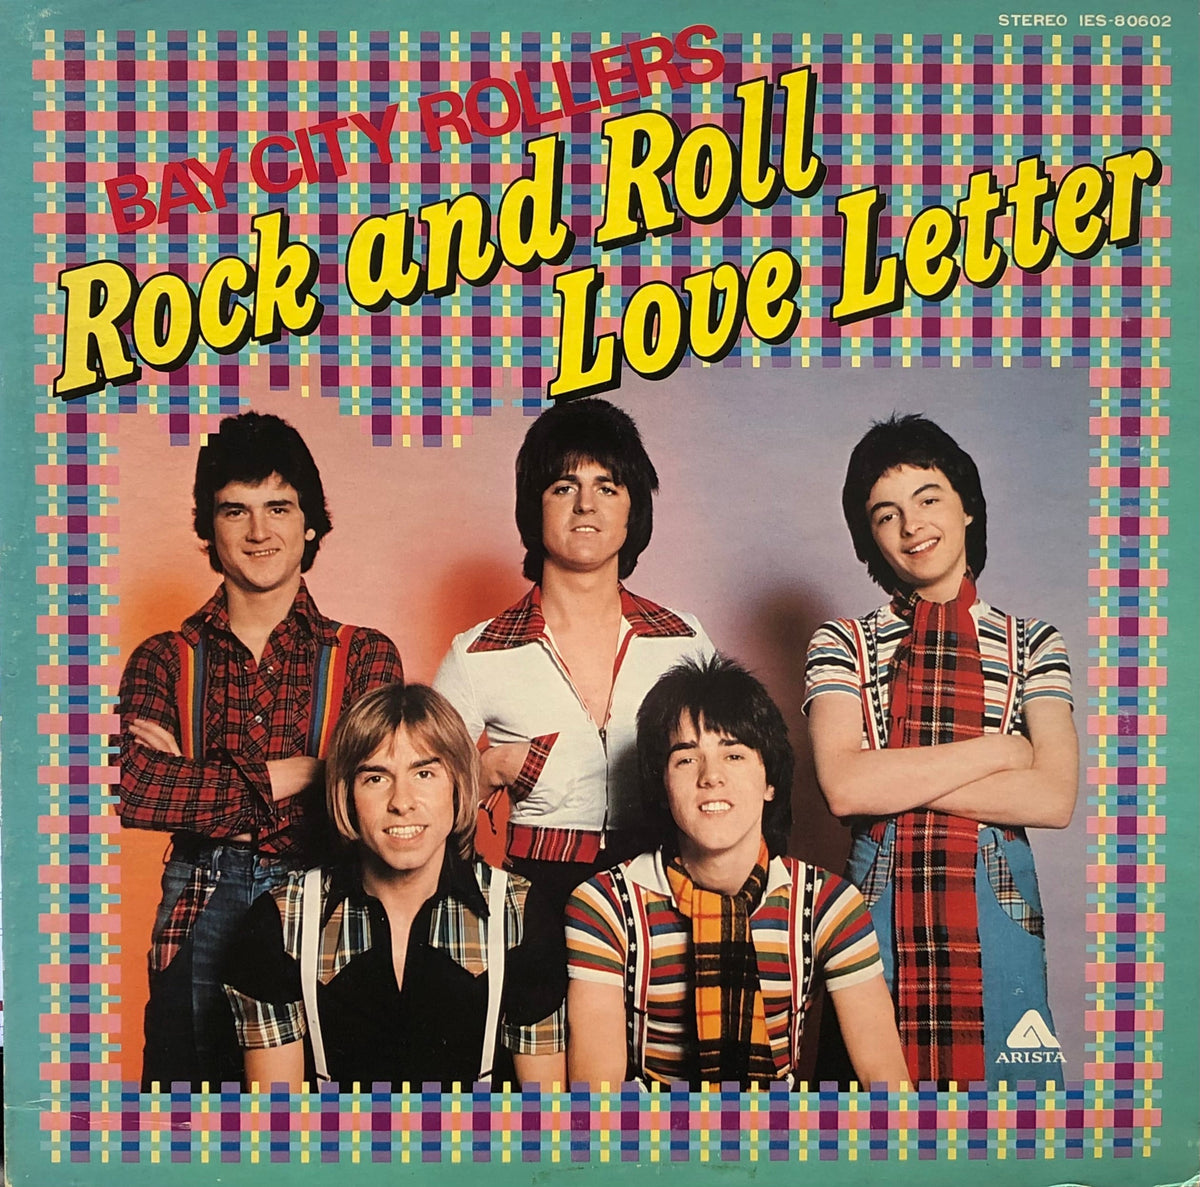 BAY CITY ROLLERS / Rock N' Roll Love Letter (incl. Saturday Night) (Arista